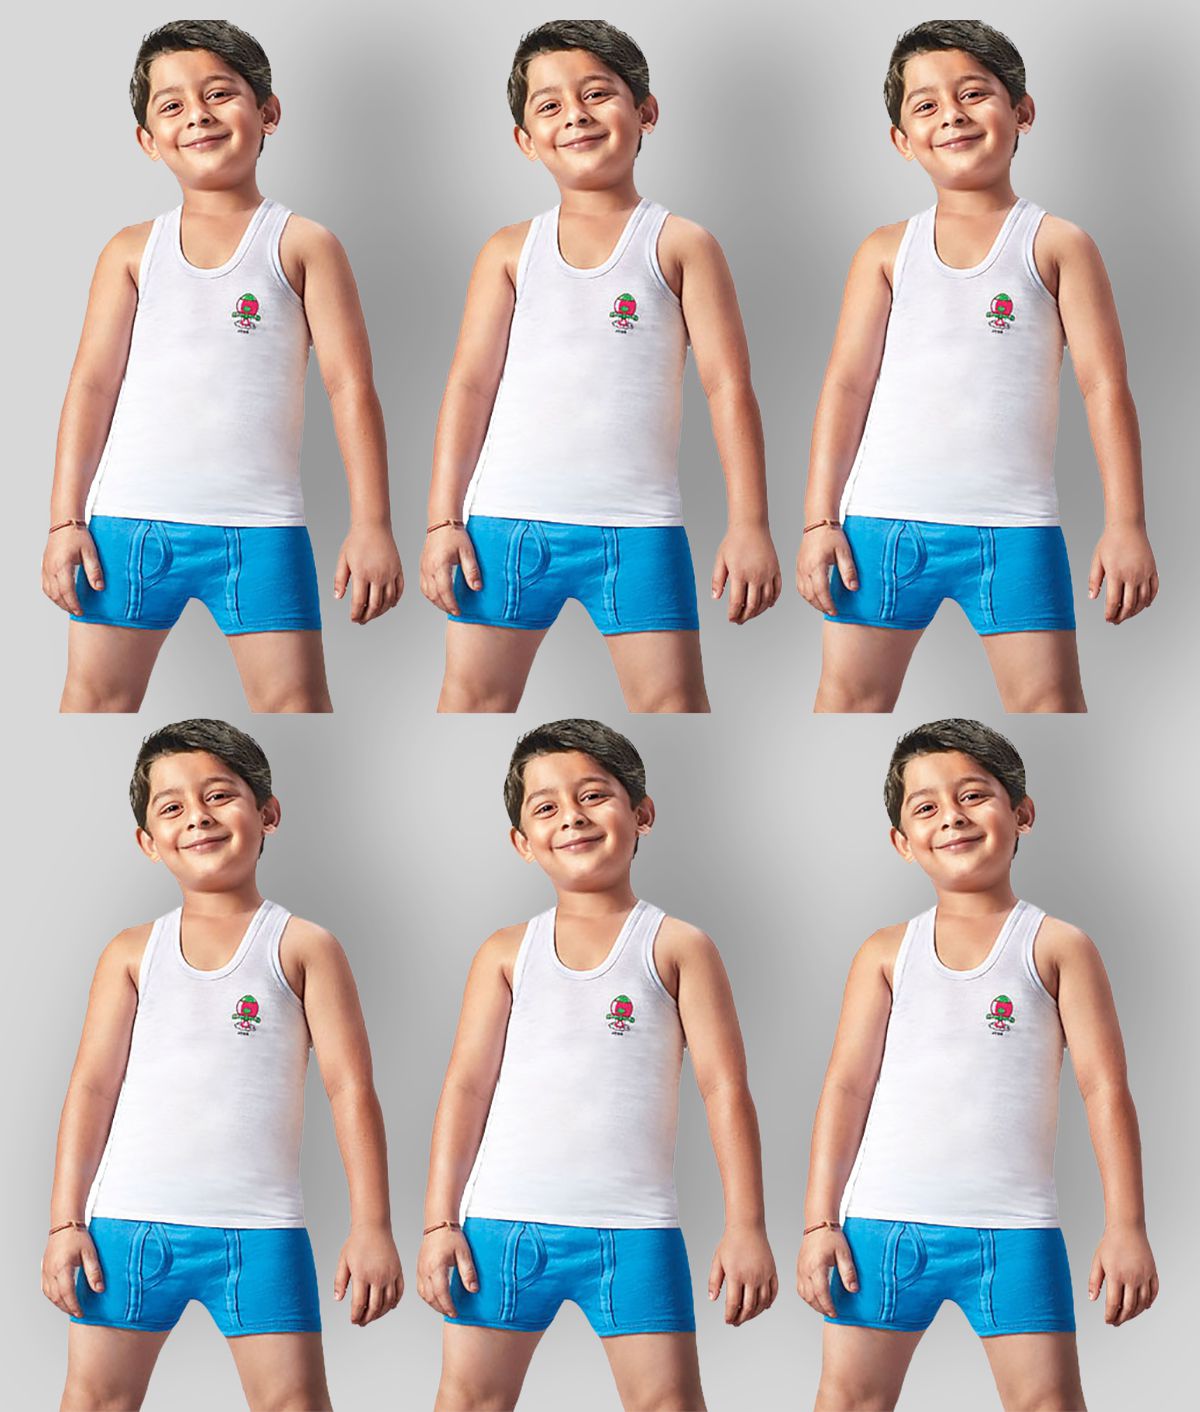     			Dixcy Josh Fine Cotton White Sleeveless Vests for Kids/Boys - Pack of 6